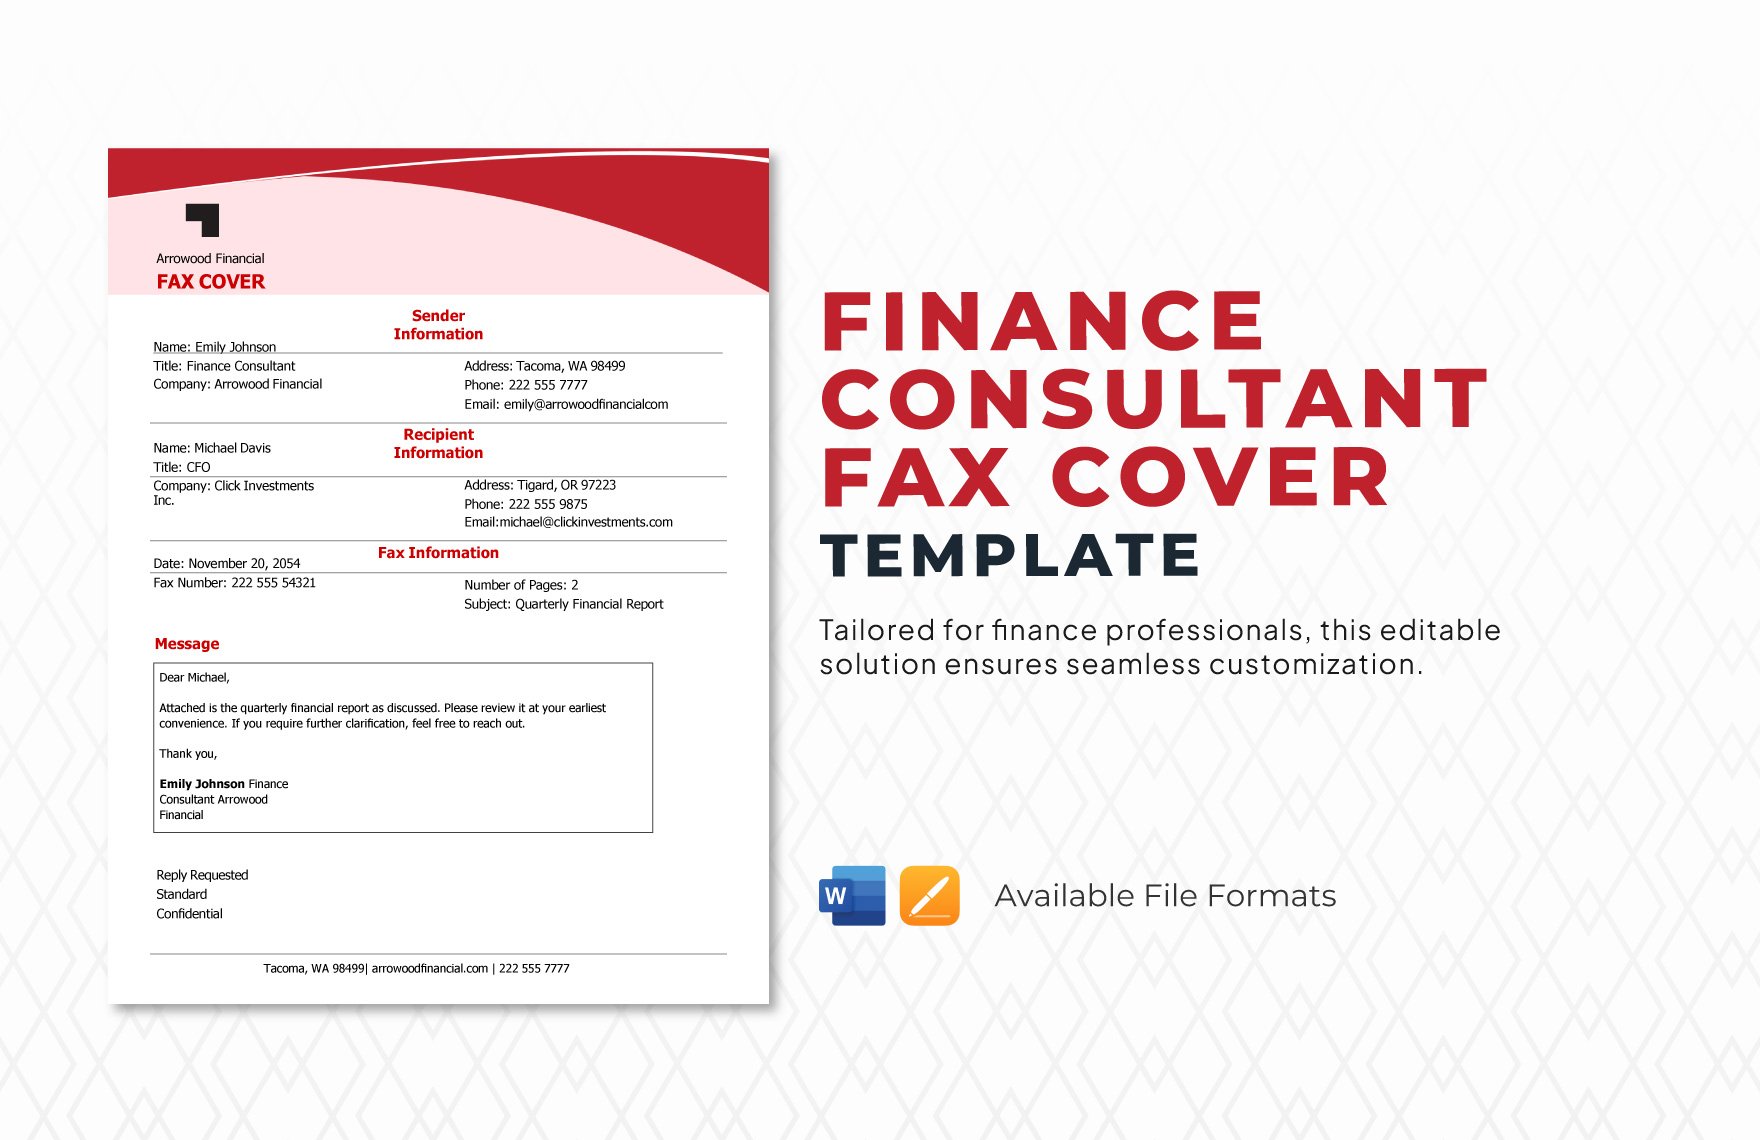 Finance Consultant Fax Cover Template